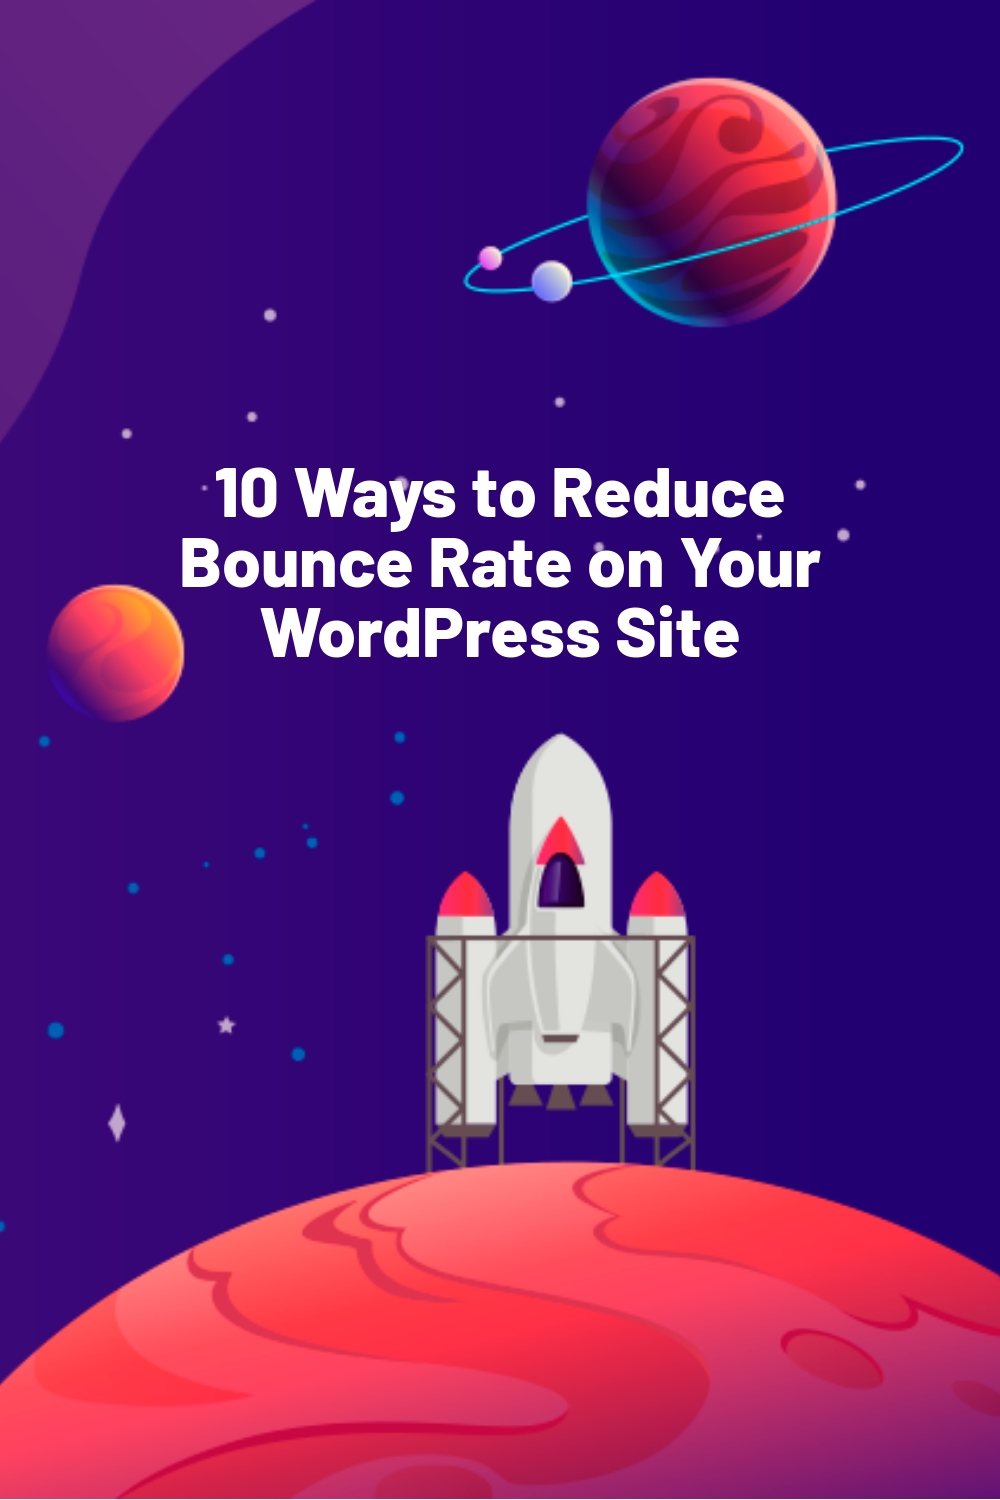 10 Ways to Reduce Bounce Rate on Your WordPress Site